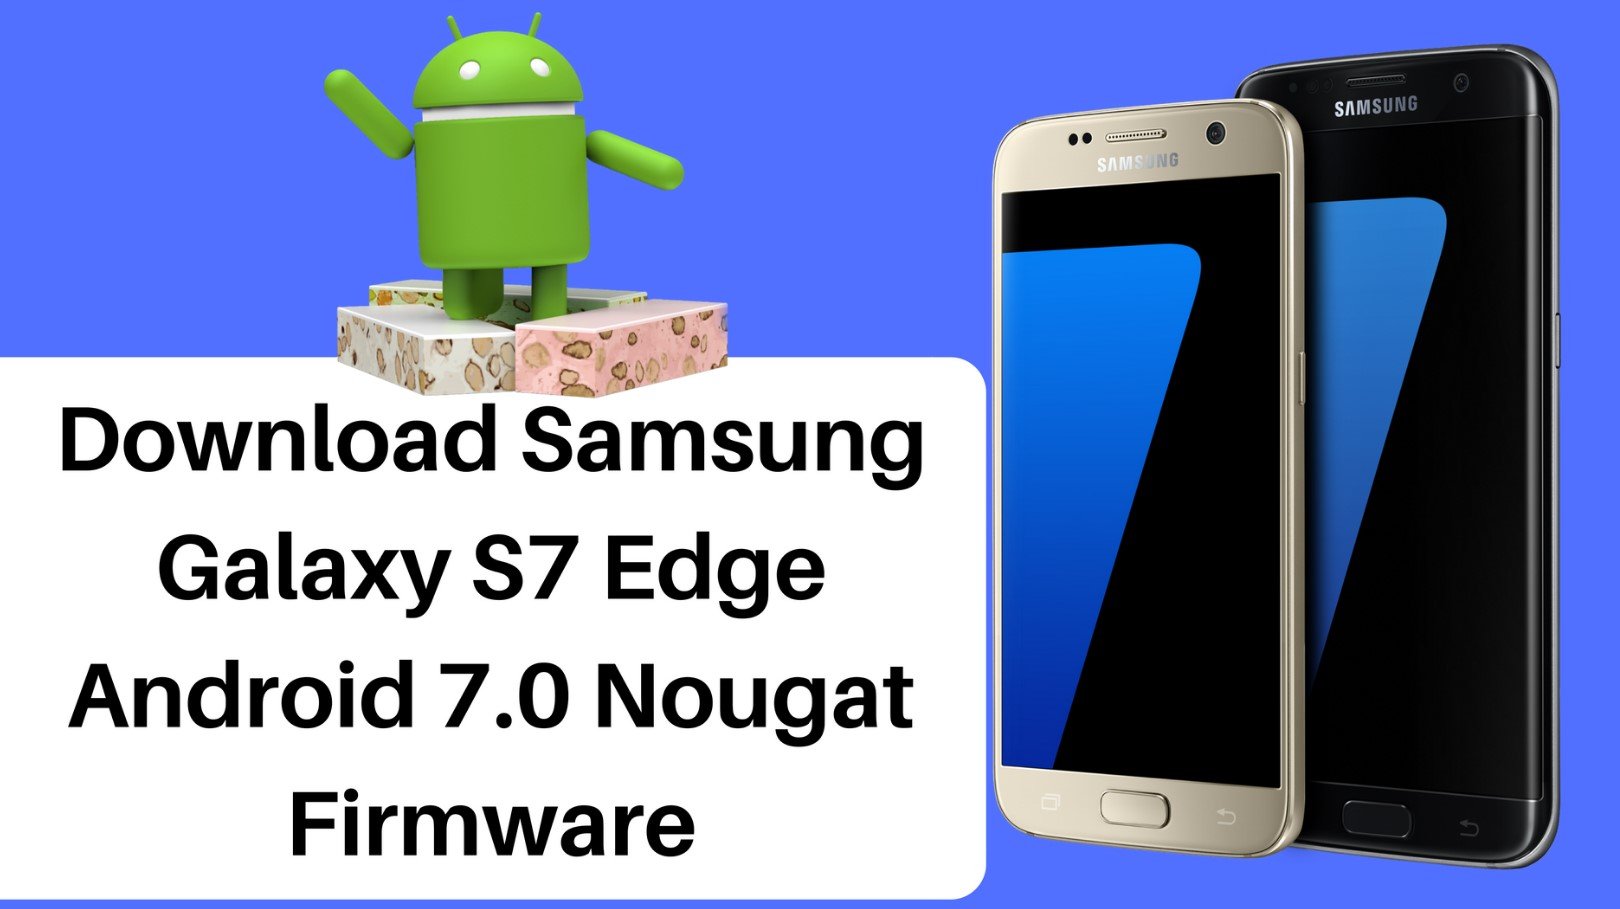 Download Samsung Galaxy S7 Edge Android 7.0 Nougat Firmware